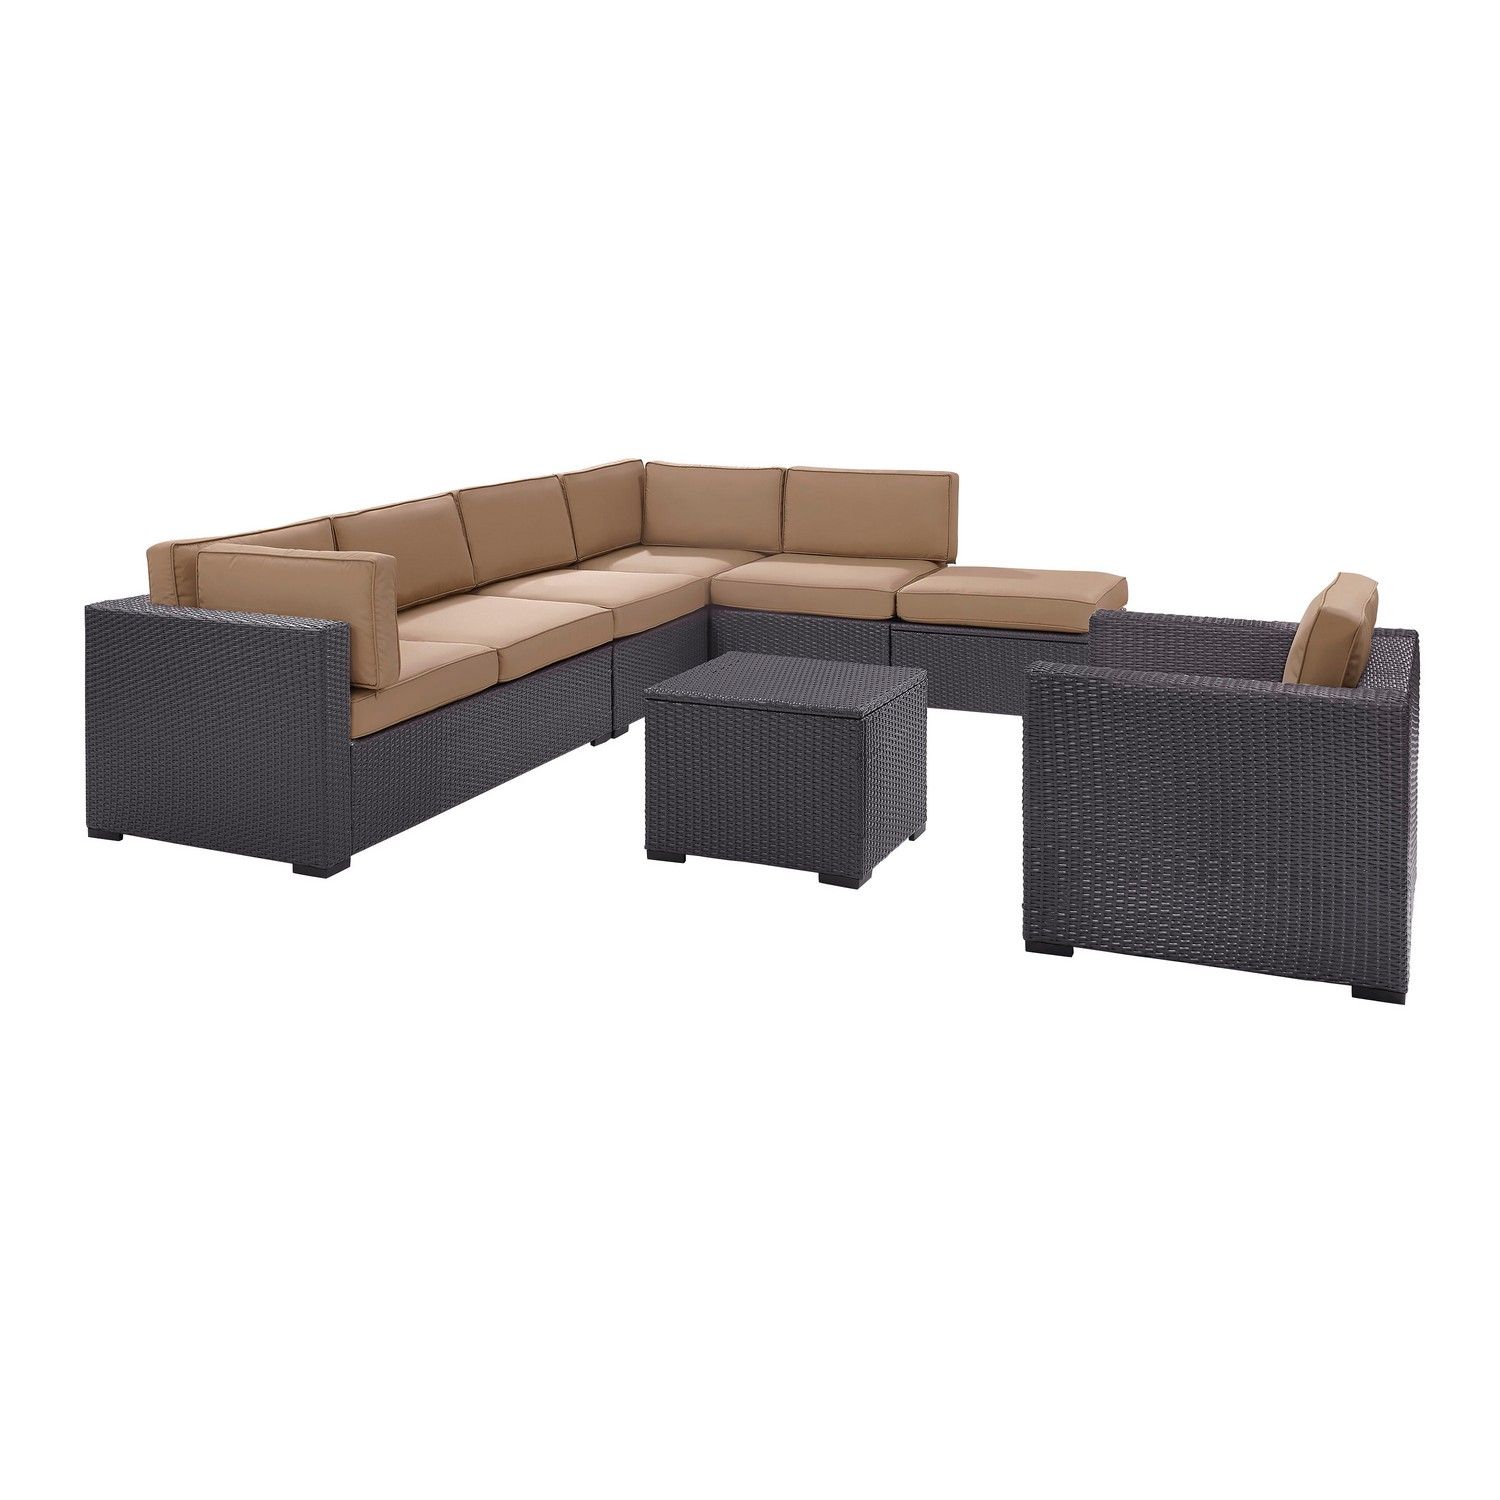 Crosley Biscayne 6-PC Outdoor Wicker Sectional Set - 2 Loveseats, Armless Chair, Arm Chair, Coffee Table, Ottoman - Mocha/Brown